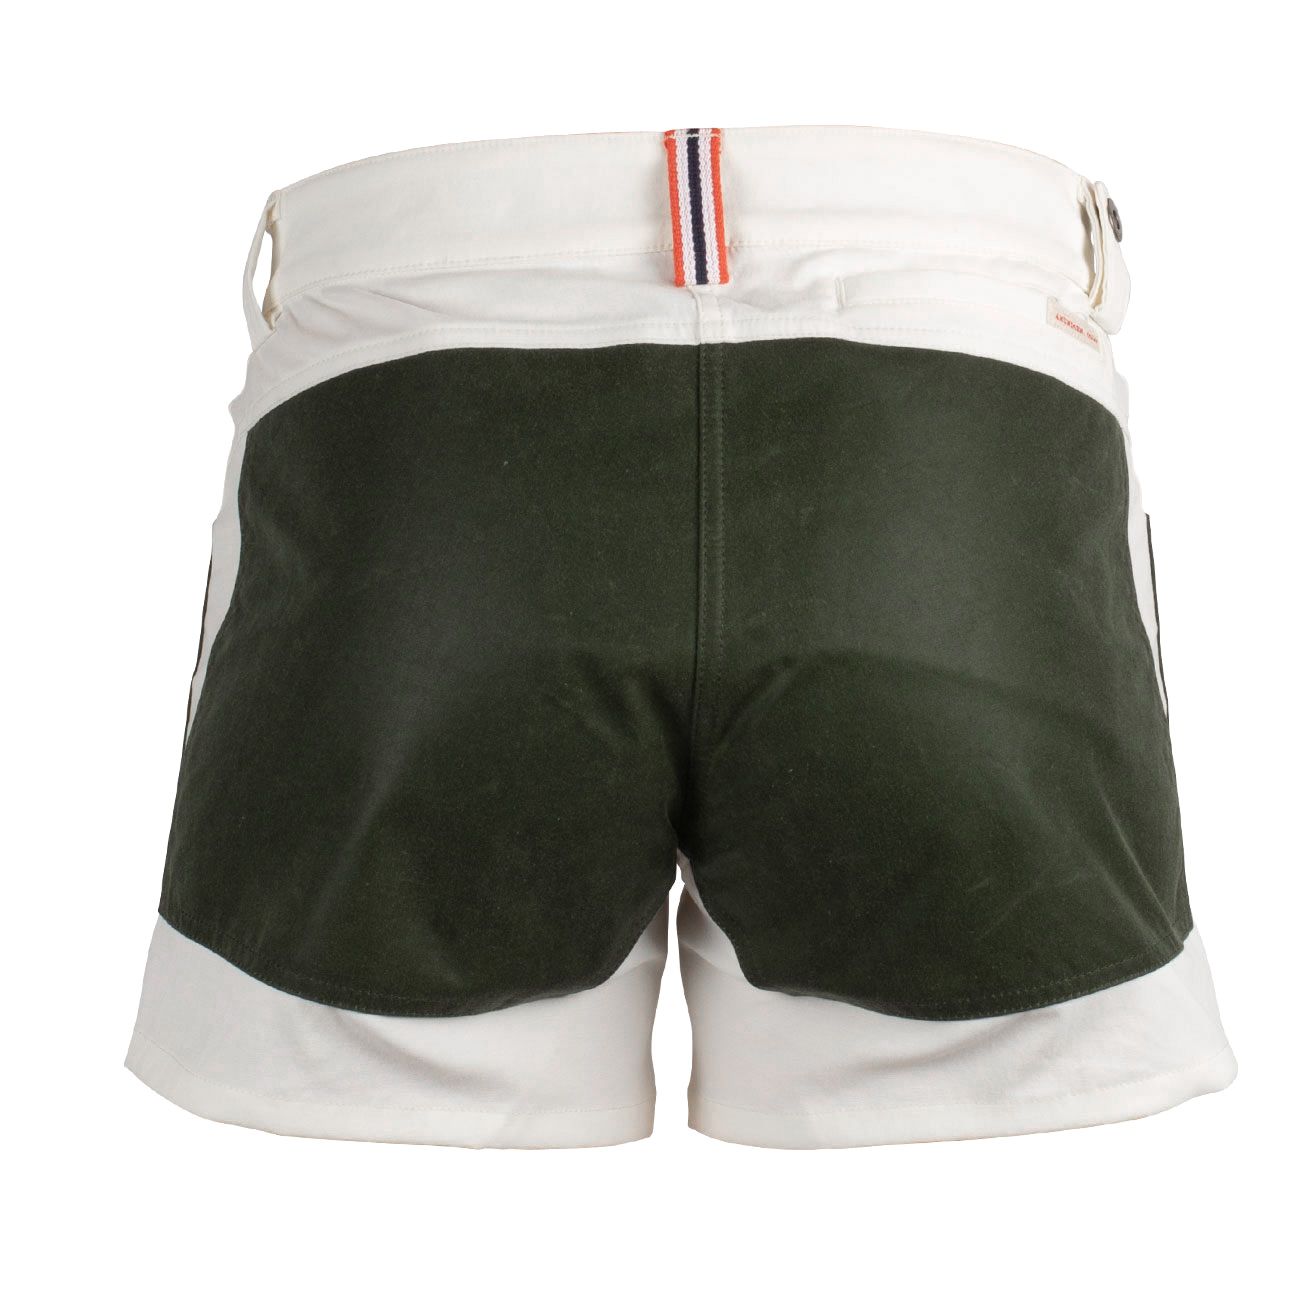 5 Incher Field Shorts Womens - Off White/Green